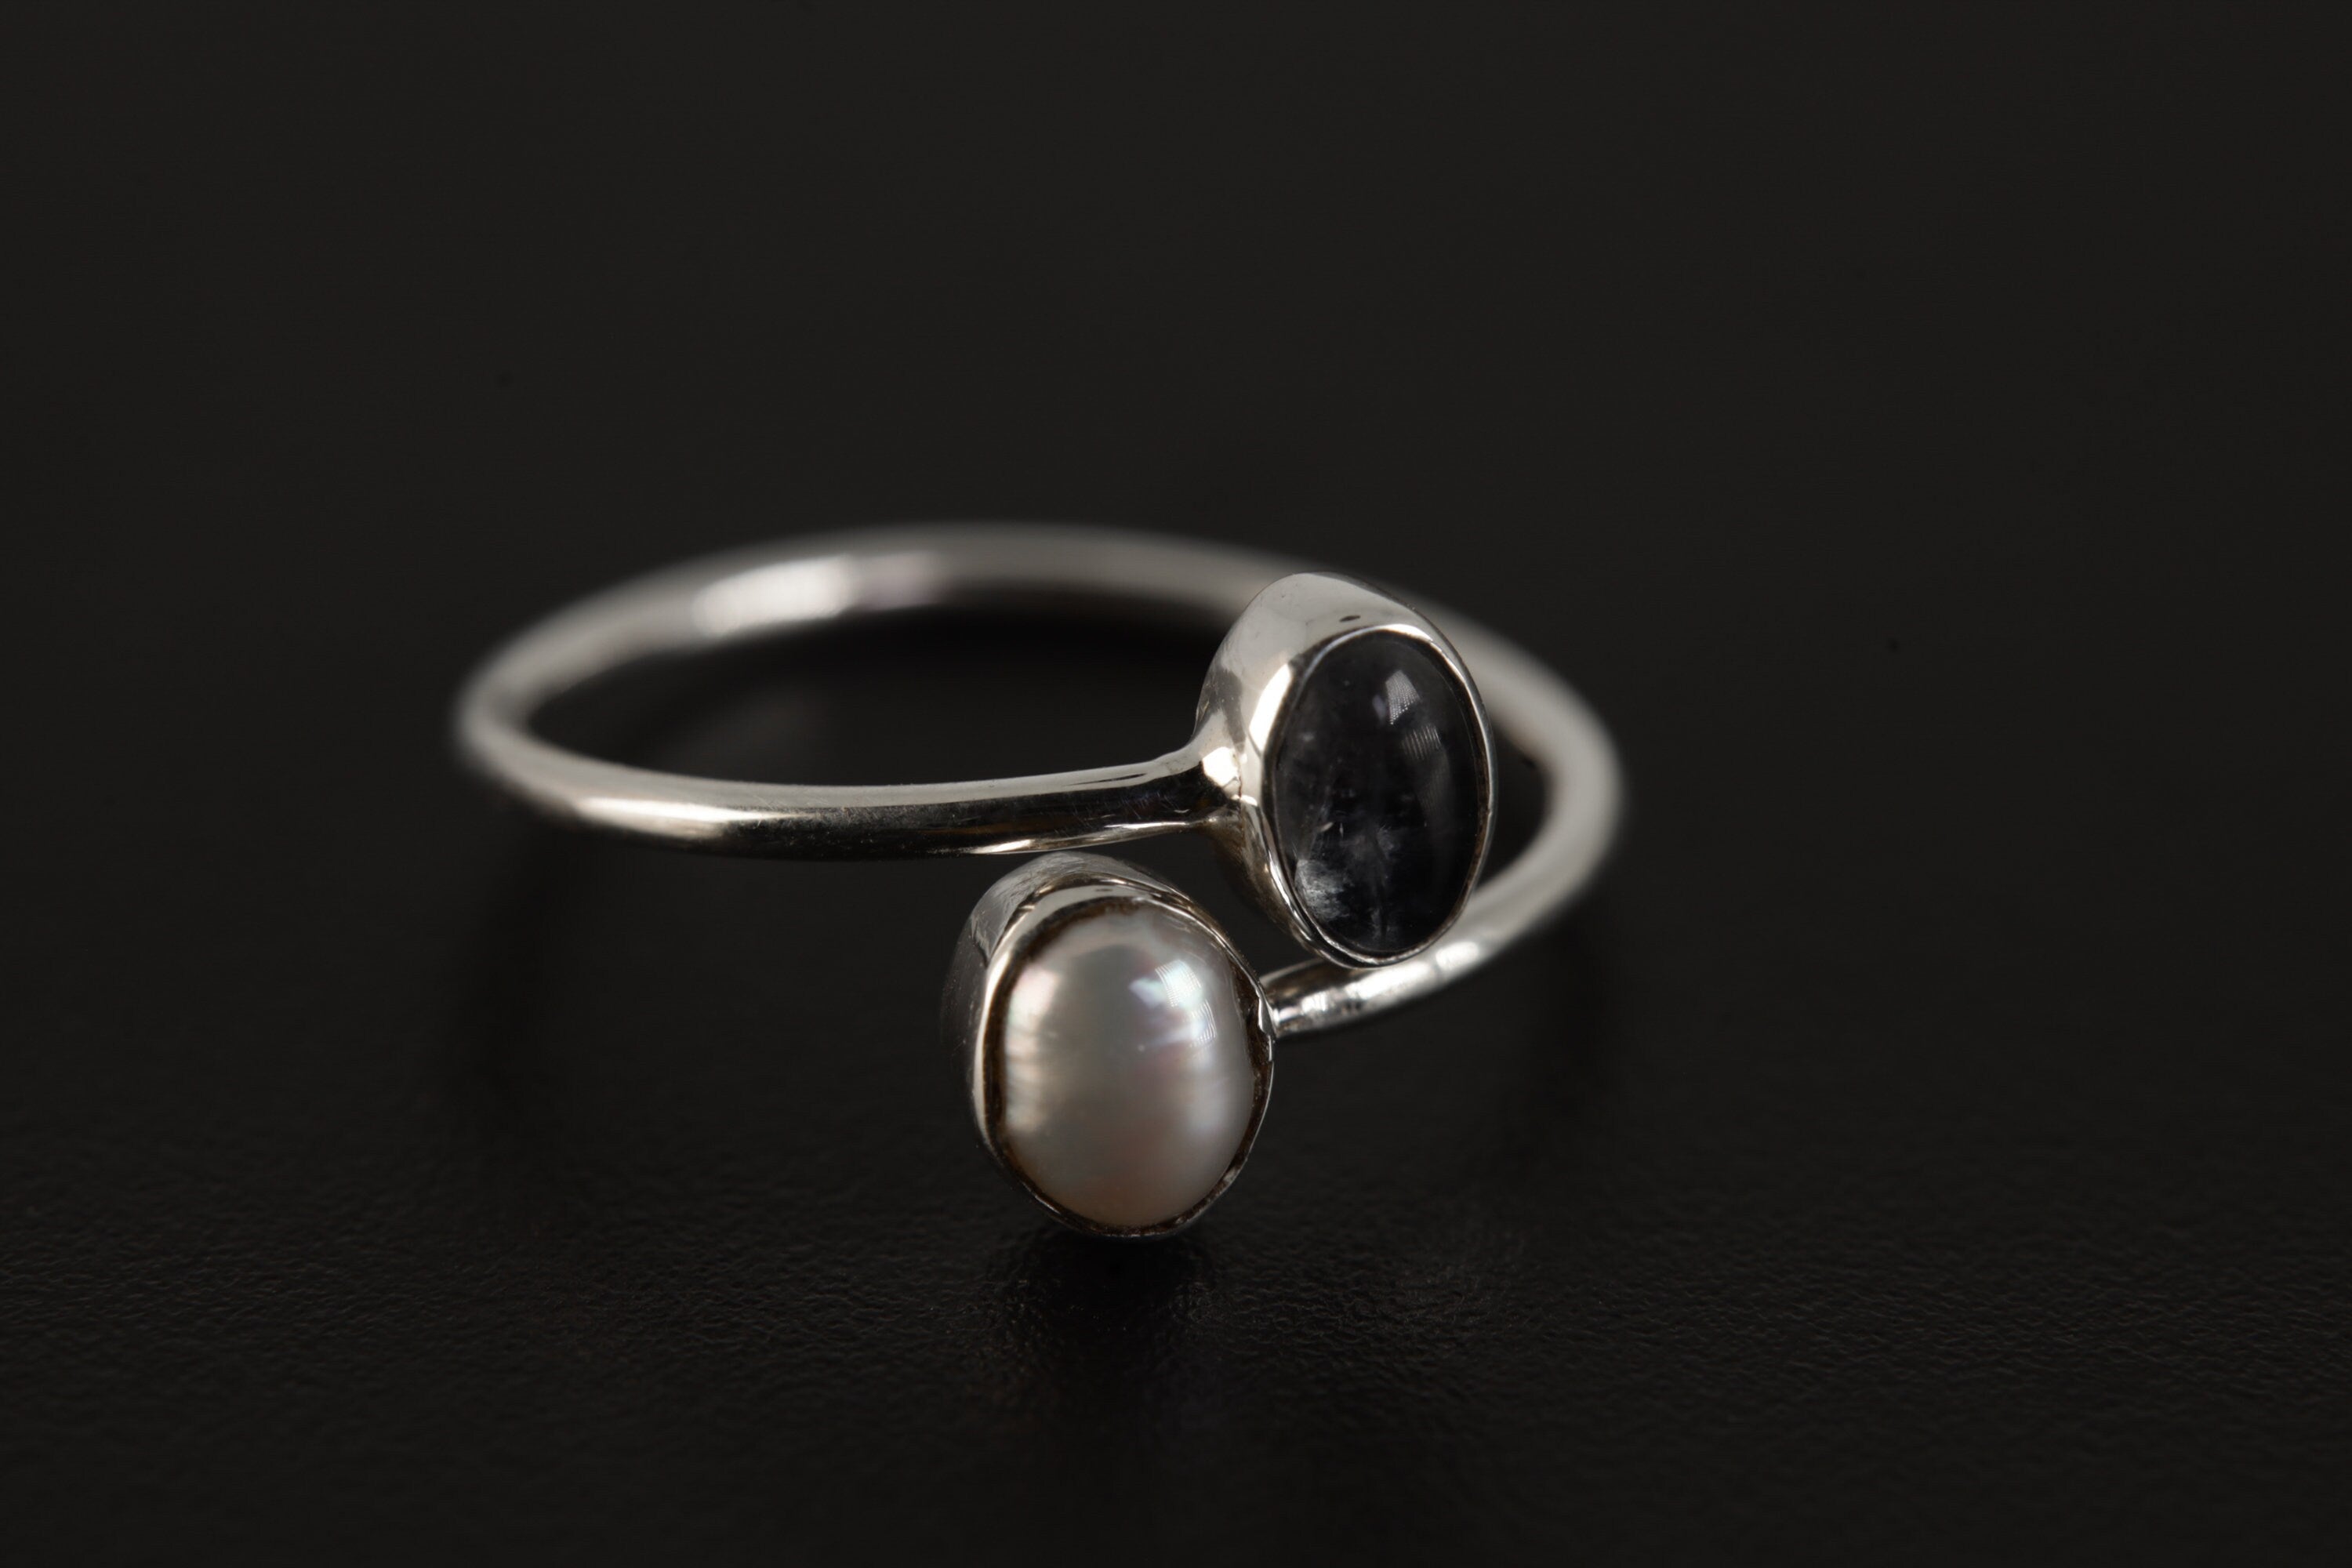 Lunar Pearl Crossroad Adjustable Ring- Sterling Silver Ring - With Blue Moonstone & Pearl -Unisex - Size 5-12 US